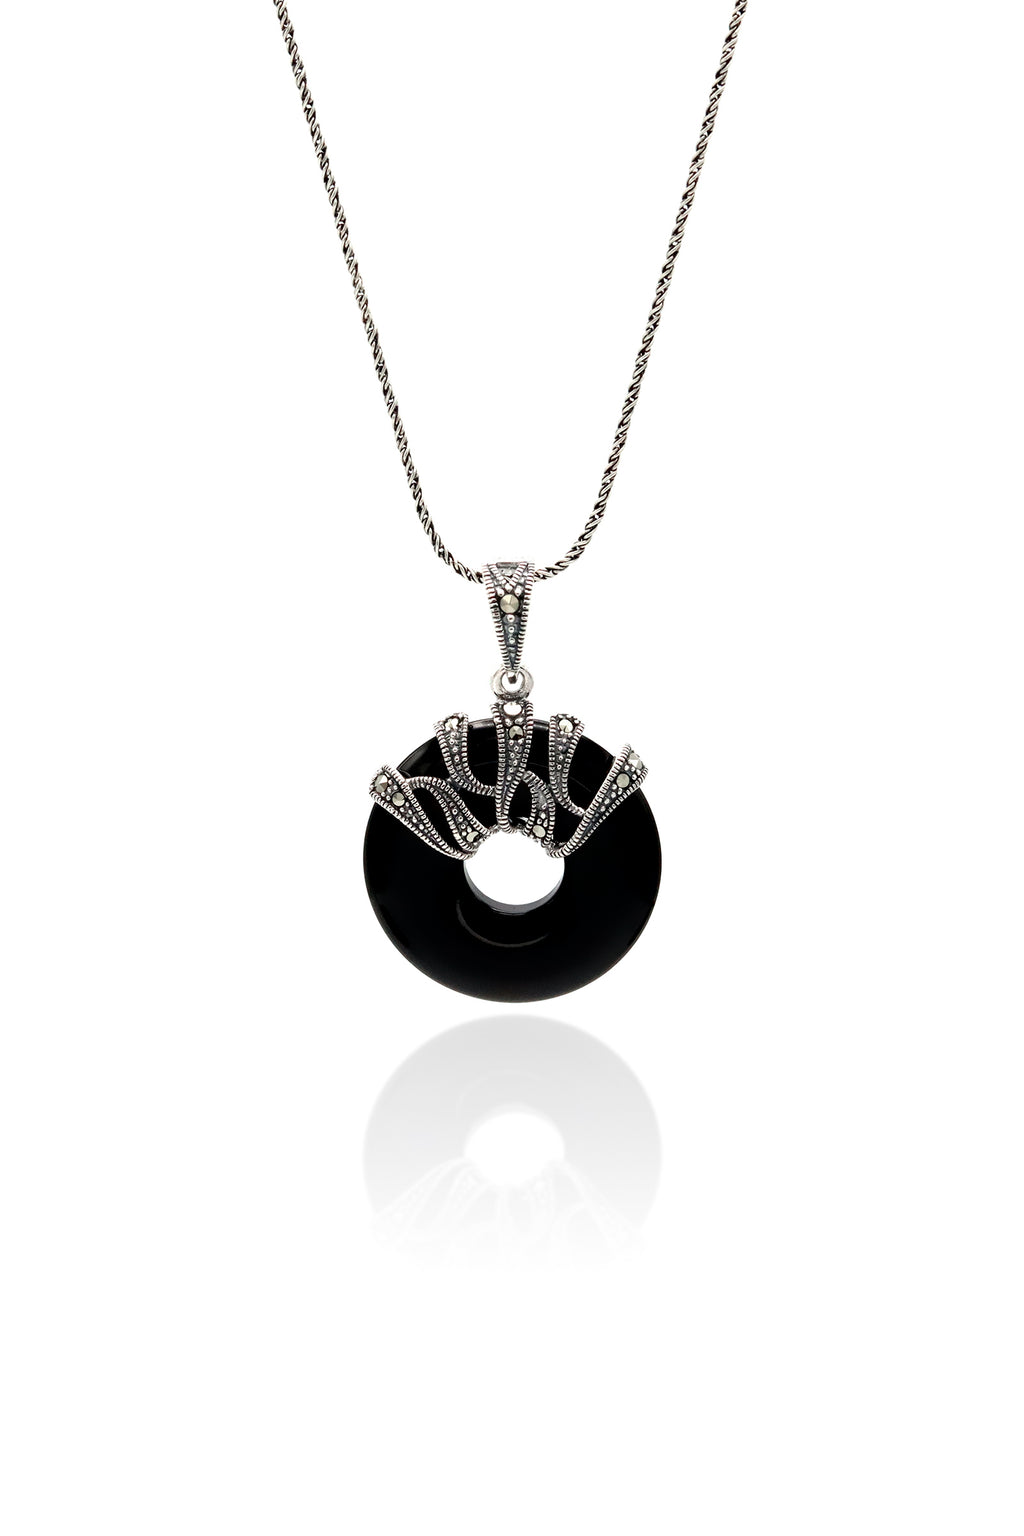 Round Model Silver Necklace With Onyx and Marcasite (NG201019653)